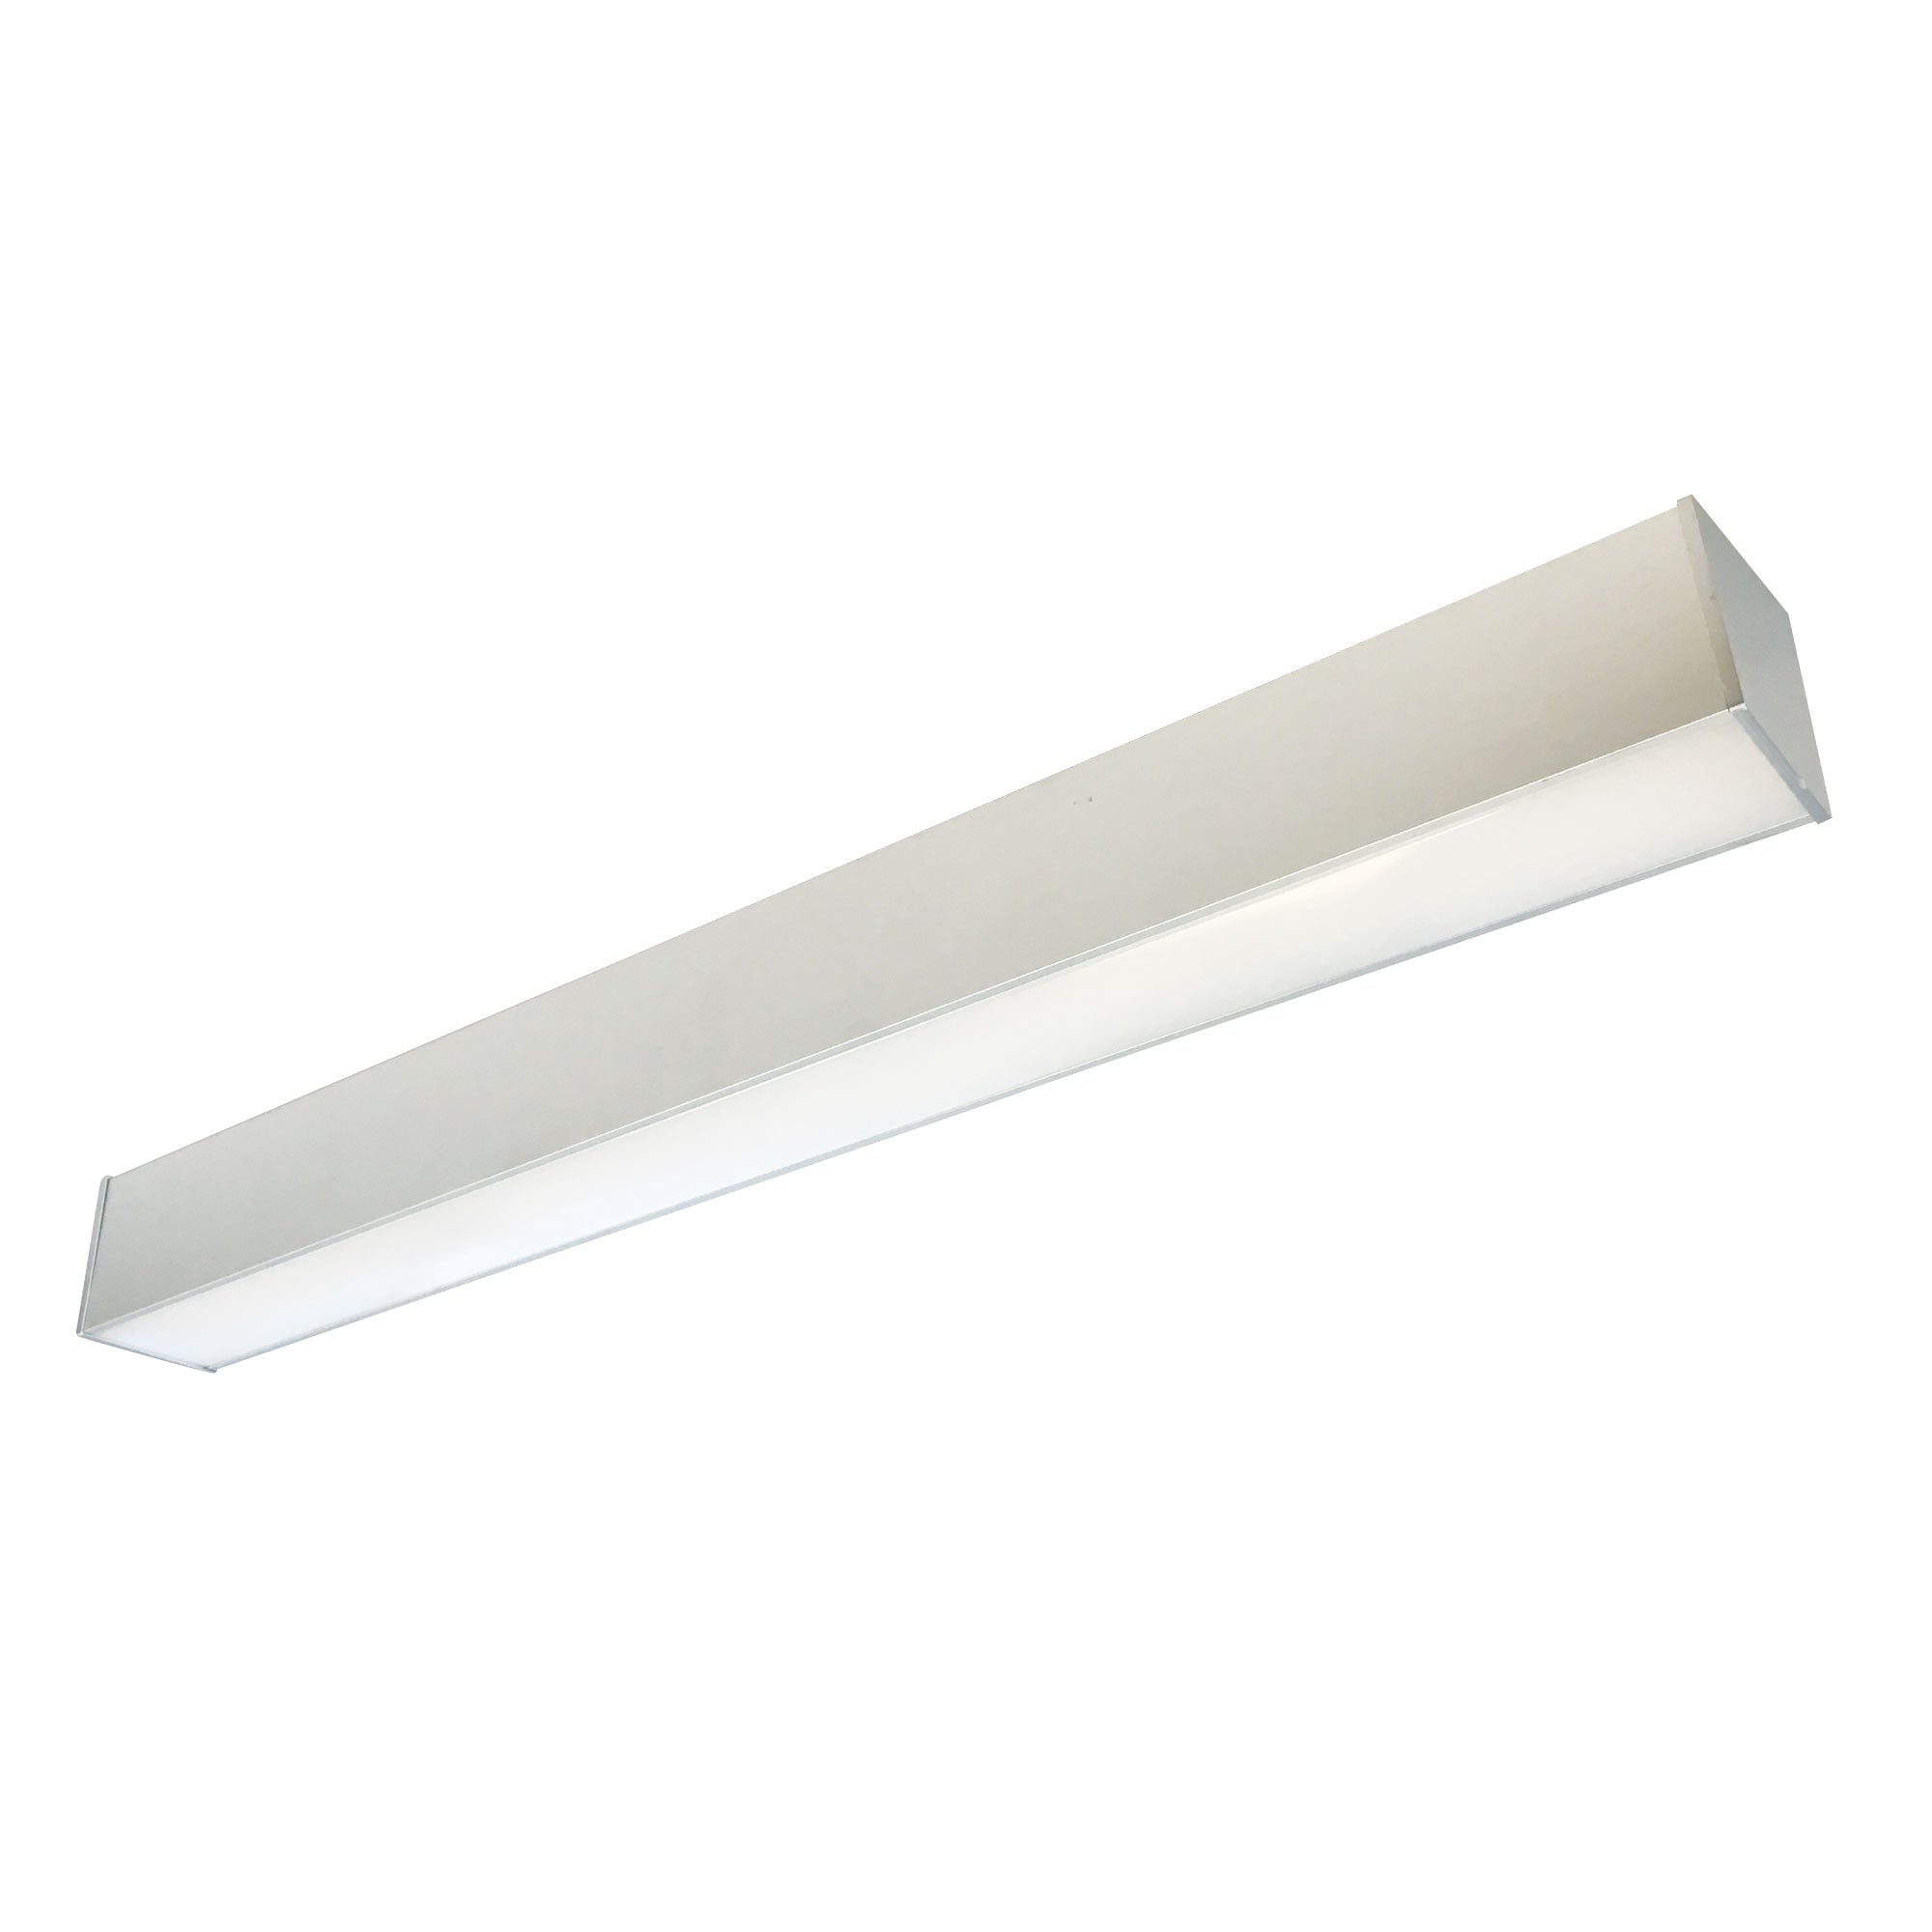 Nora Lighting NLIN-41040A - Linear - 4' L-Line LED Direct Linear w/ Dedicated CCT, 4200lm / 4000K, Aluminum Finish